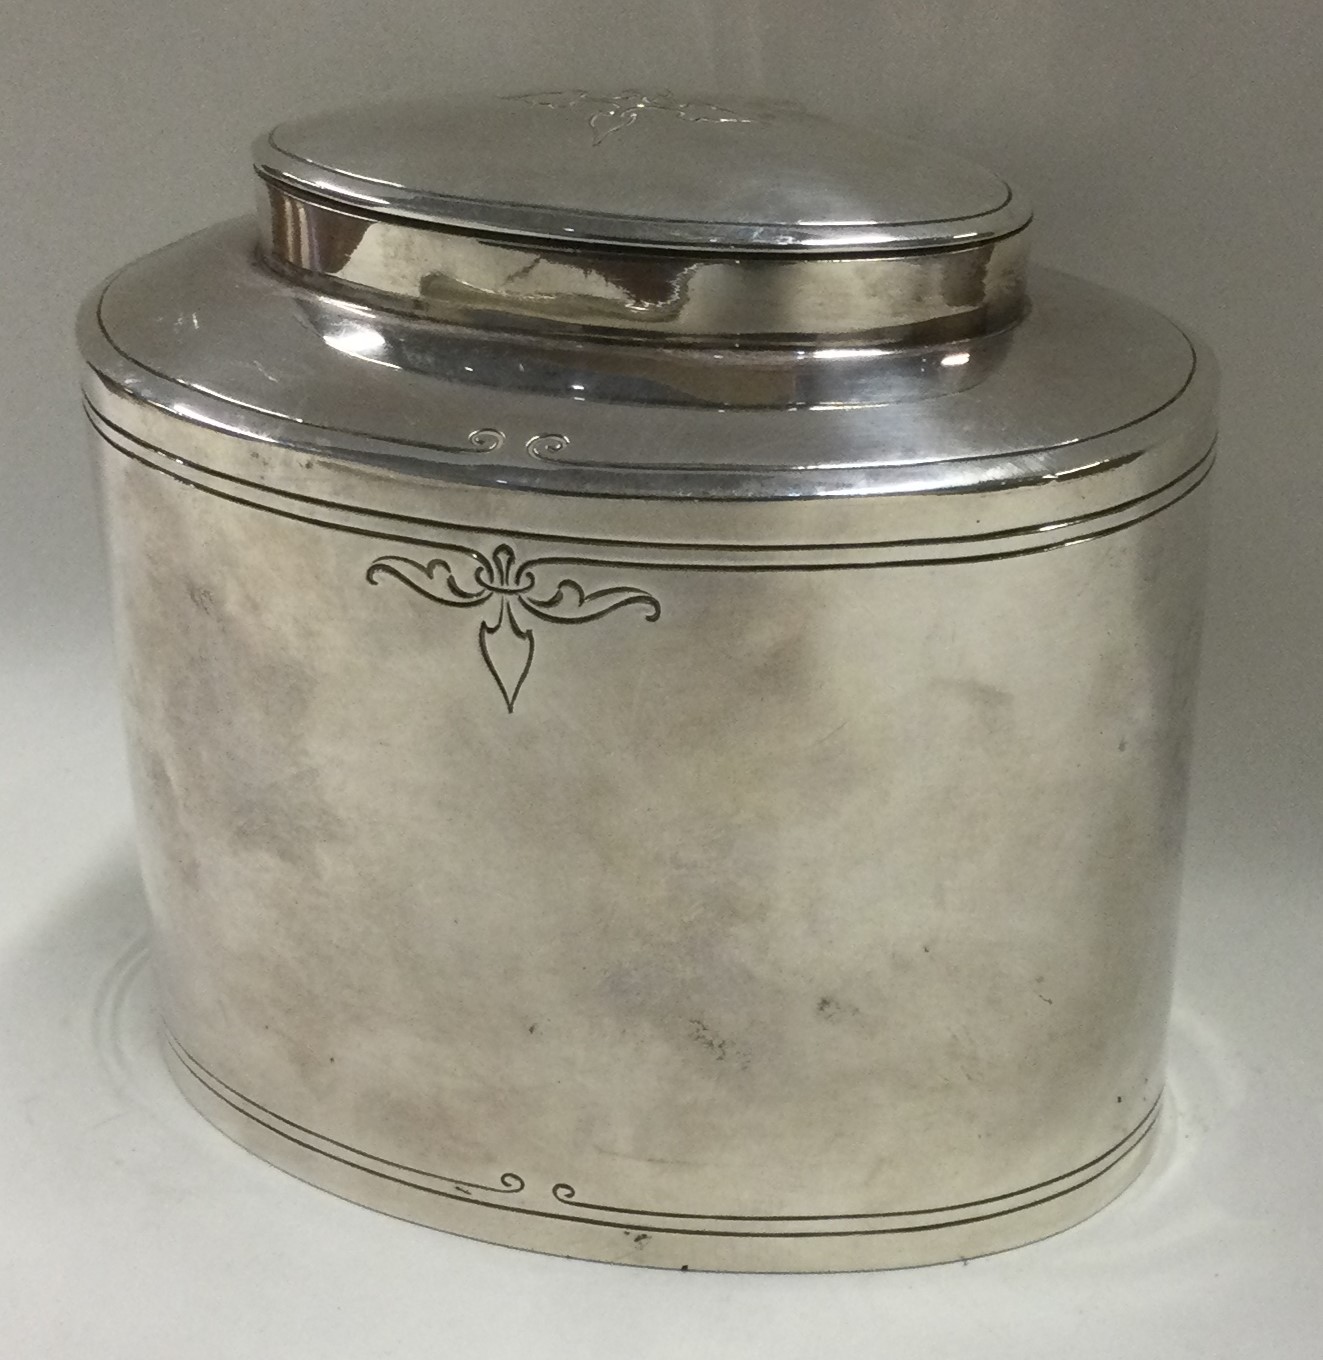 A heavy Sterling silver tea caddy with floral decoration.